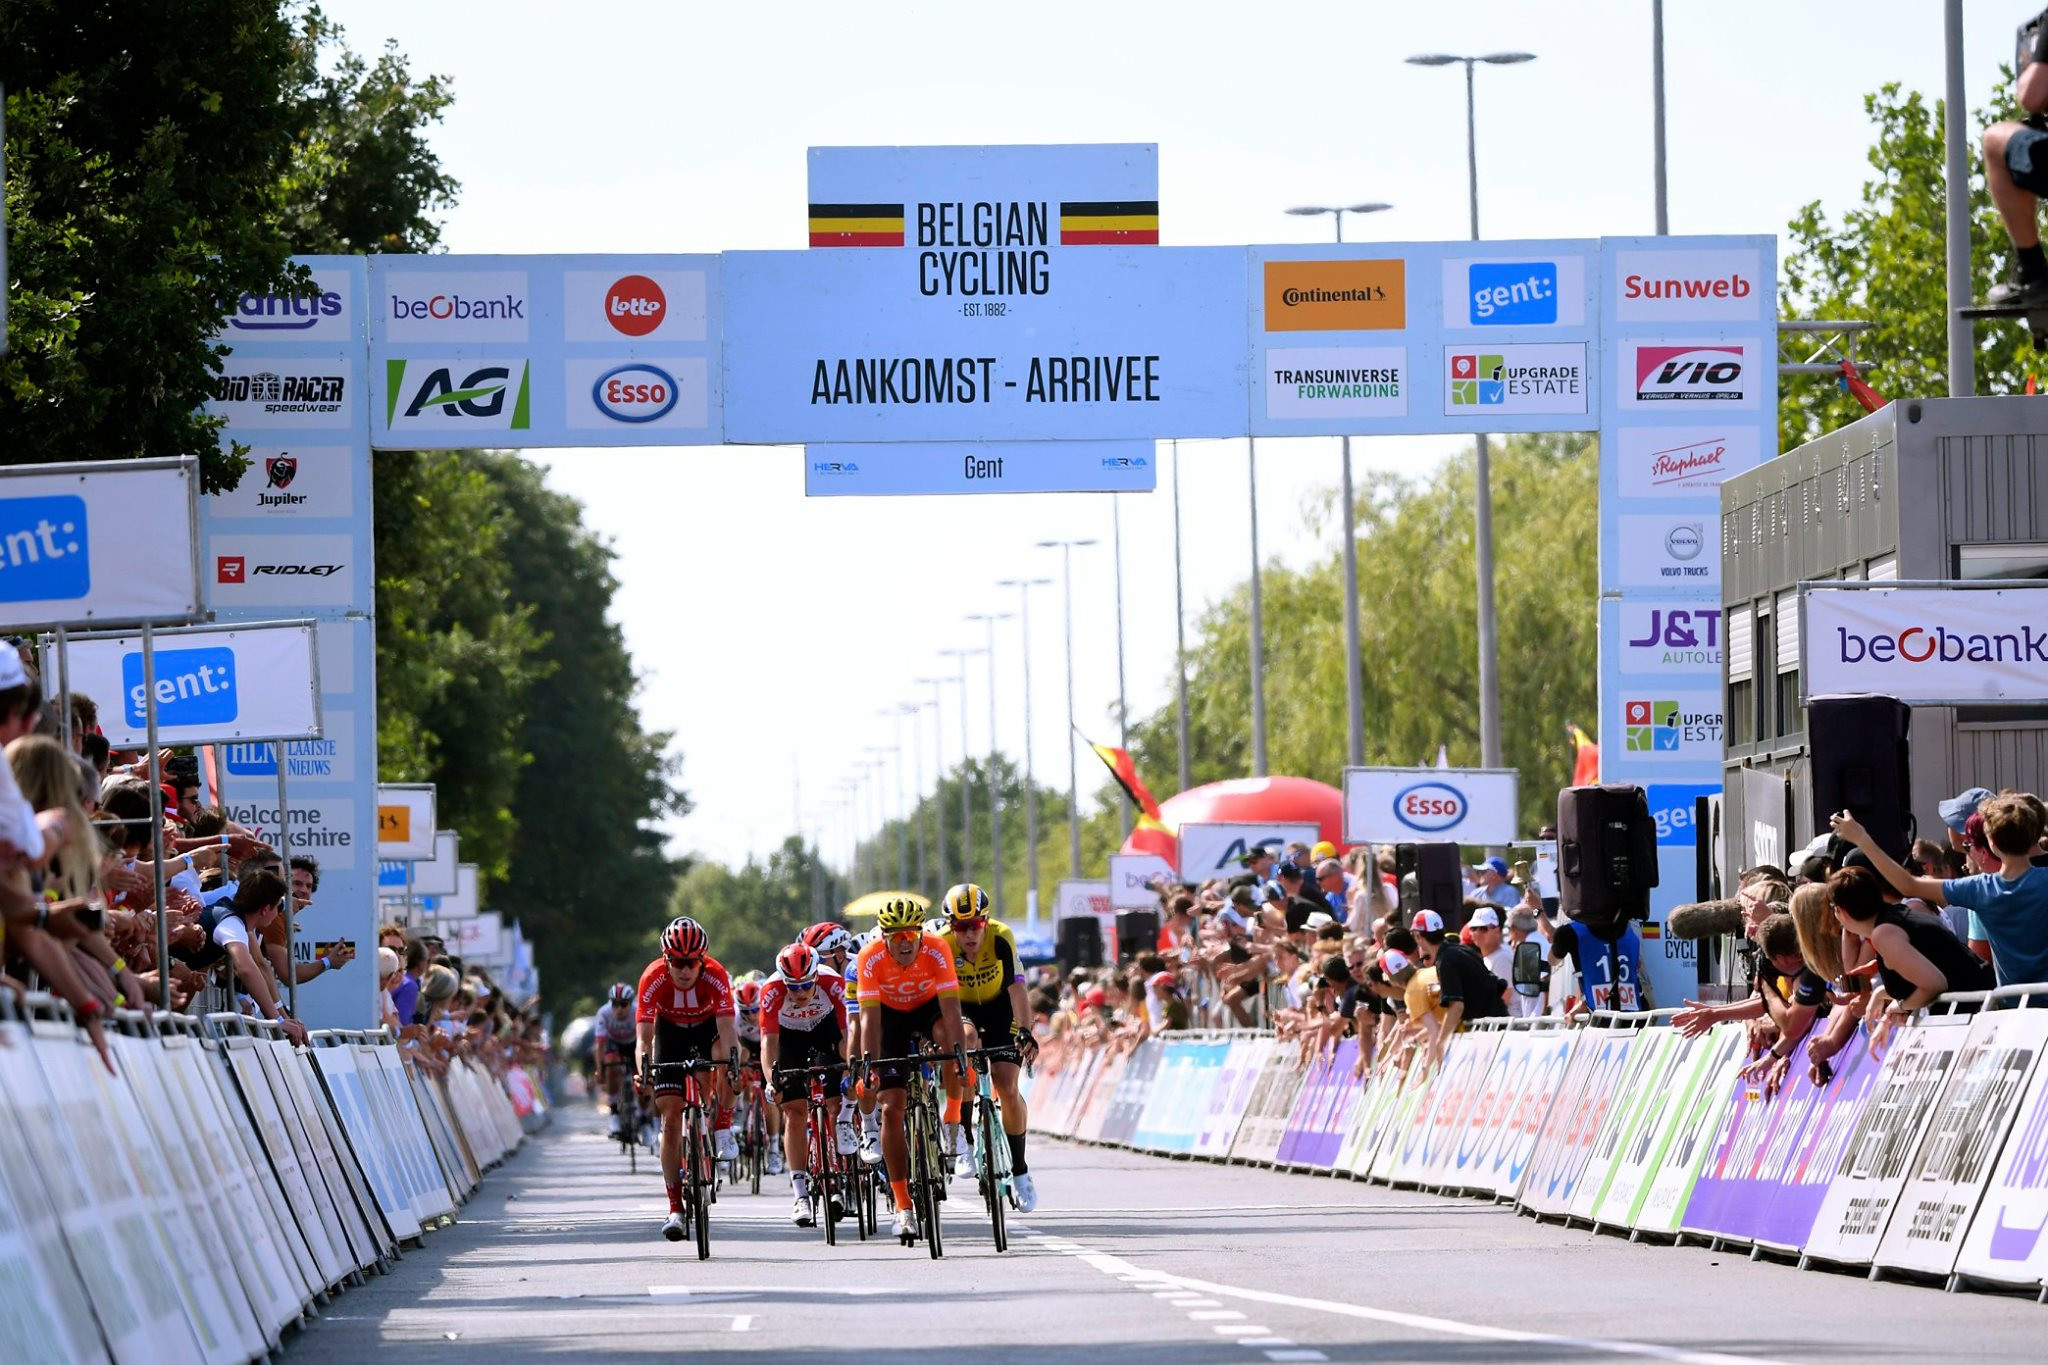 The Belgian Cycling Federation plans to stage its Road Race Championships two days after the Tour de France ©Belgian Cycling Federation